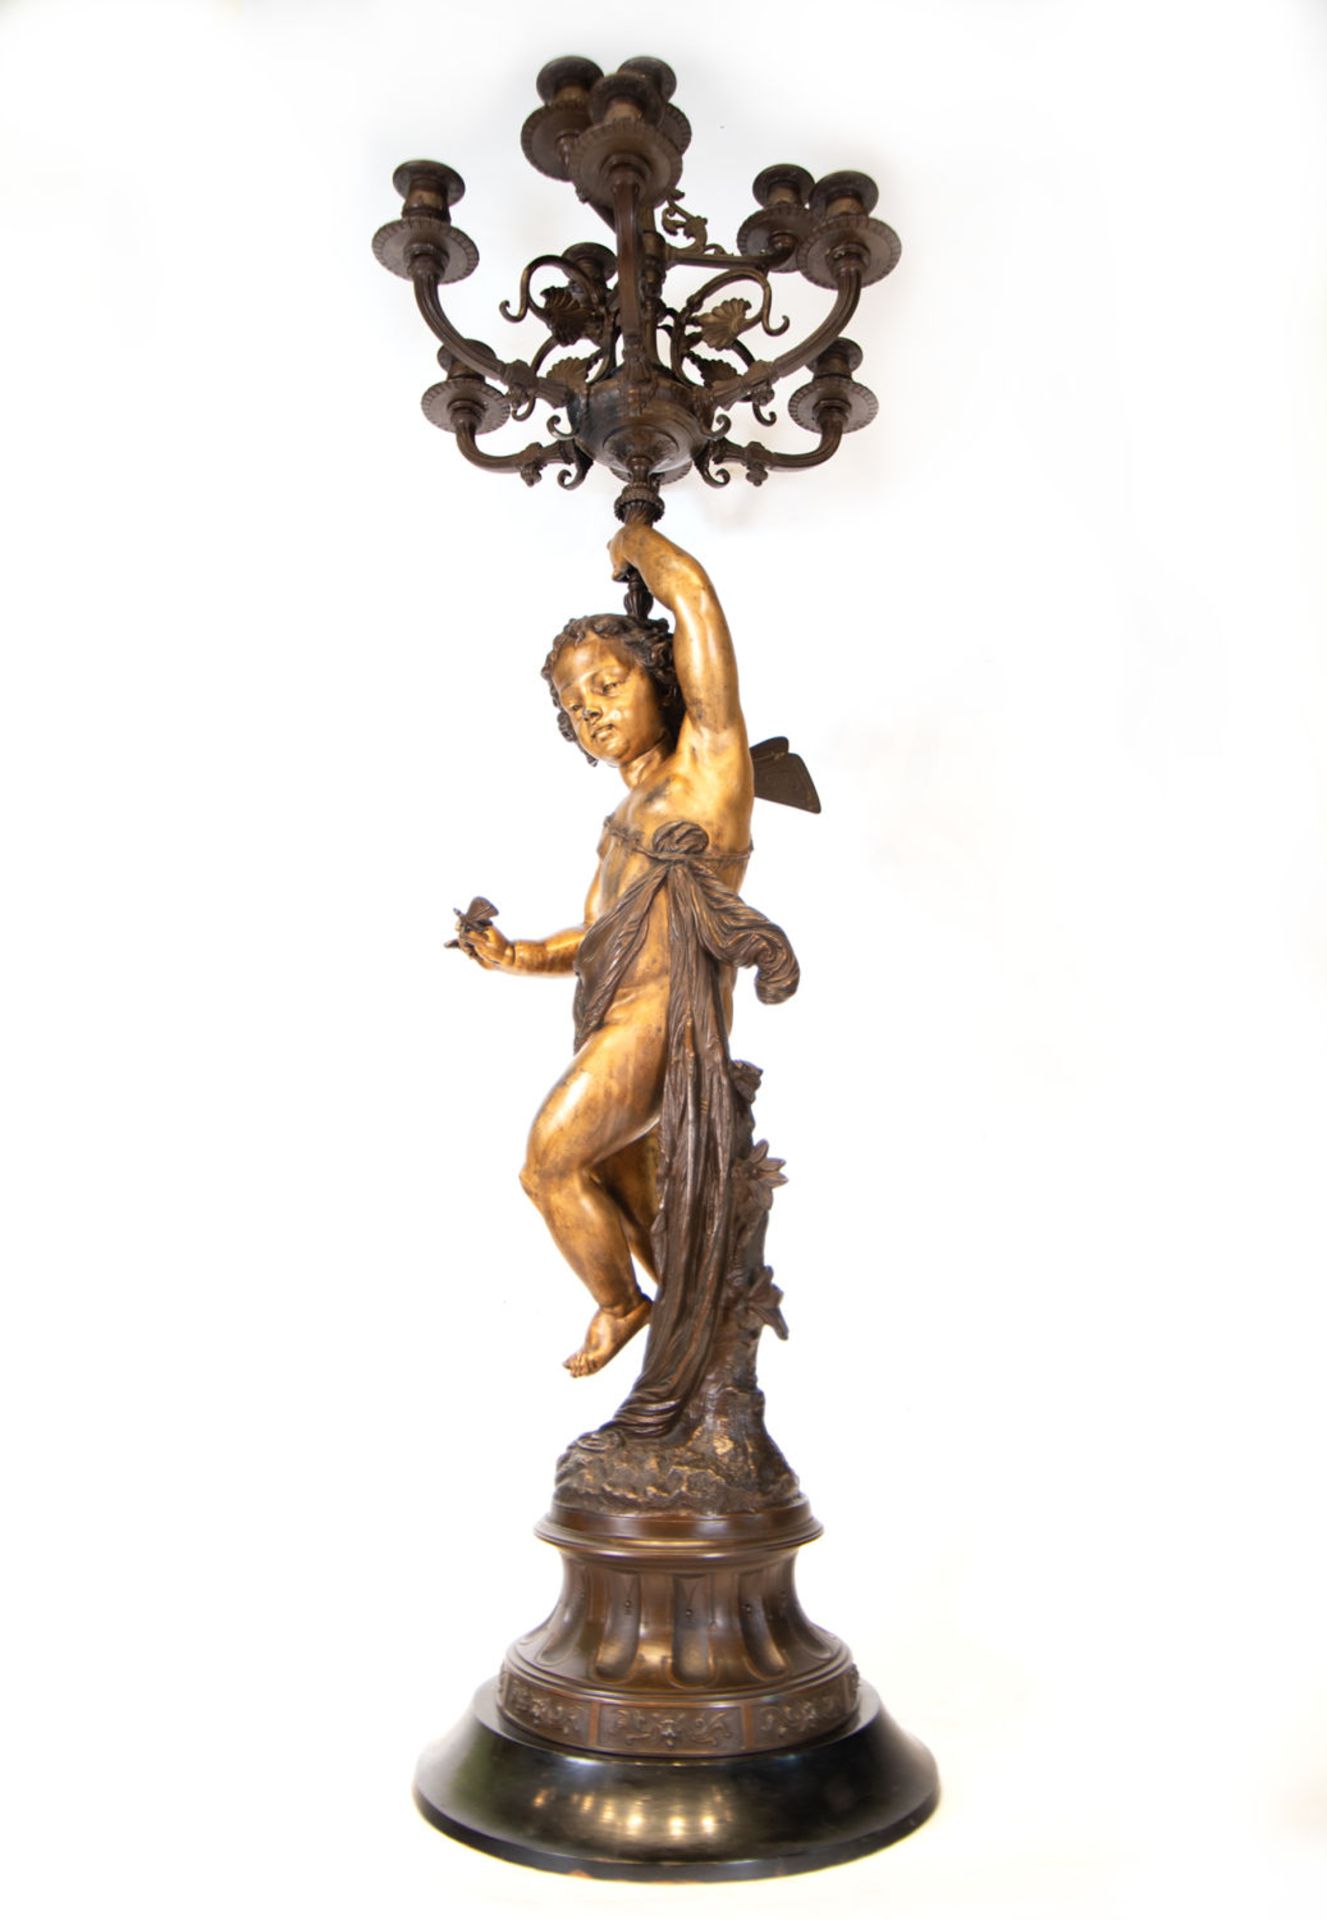 Massive Pair of French 19th Gilt Bronze Torcheres in the manner of Jean Baptiste Carpeaux NO RESERVE - Image 8 of 9